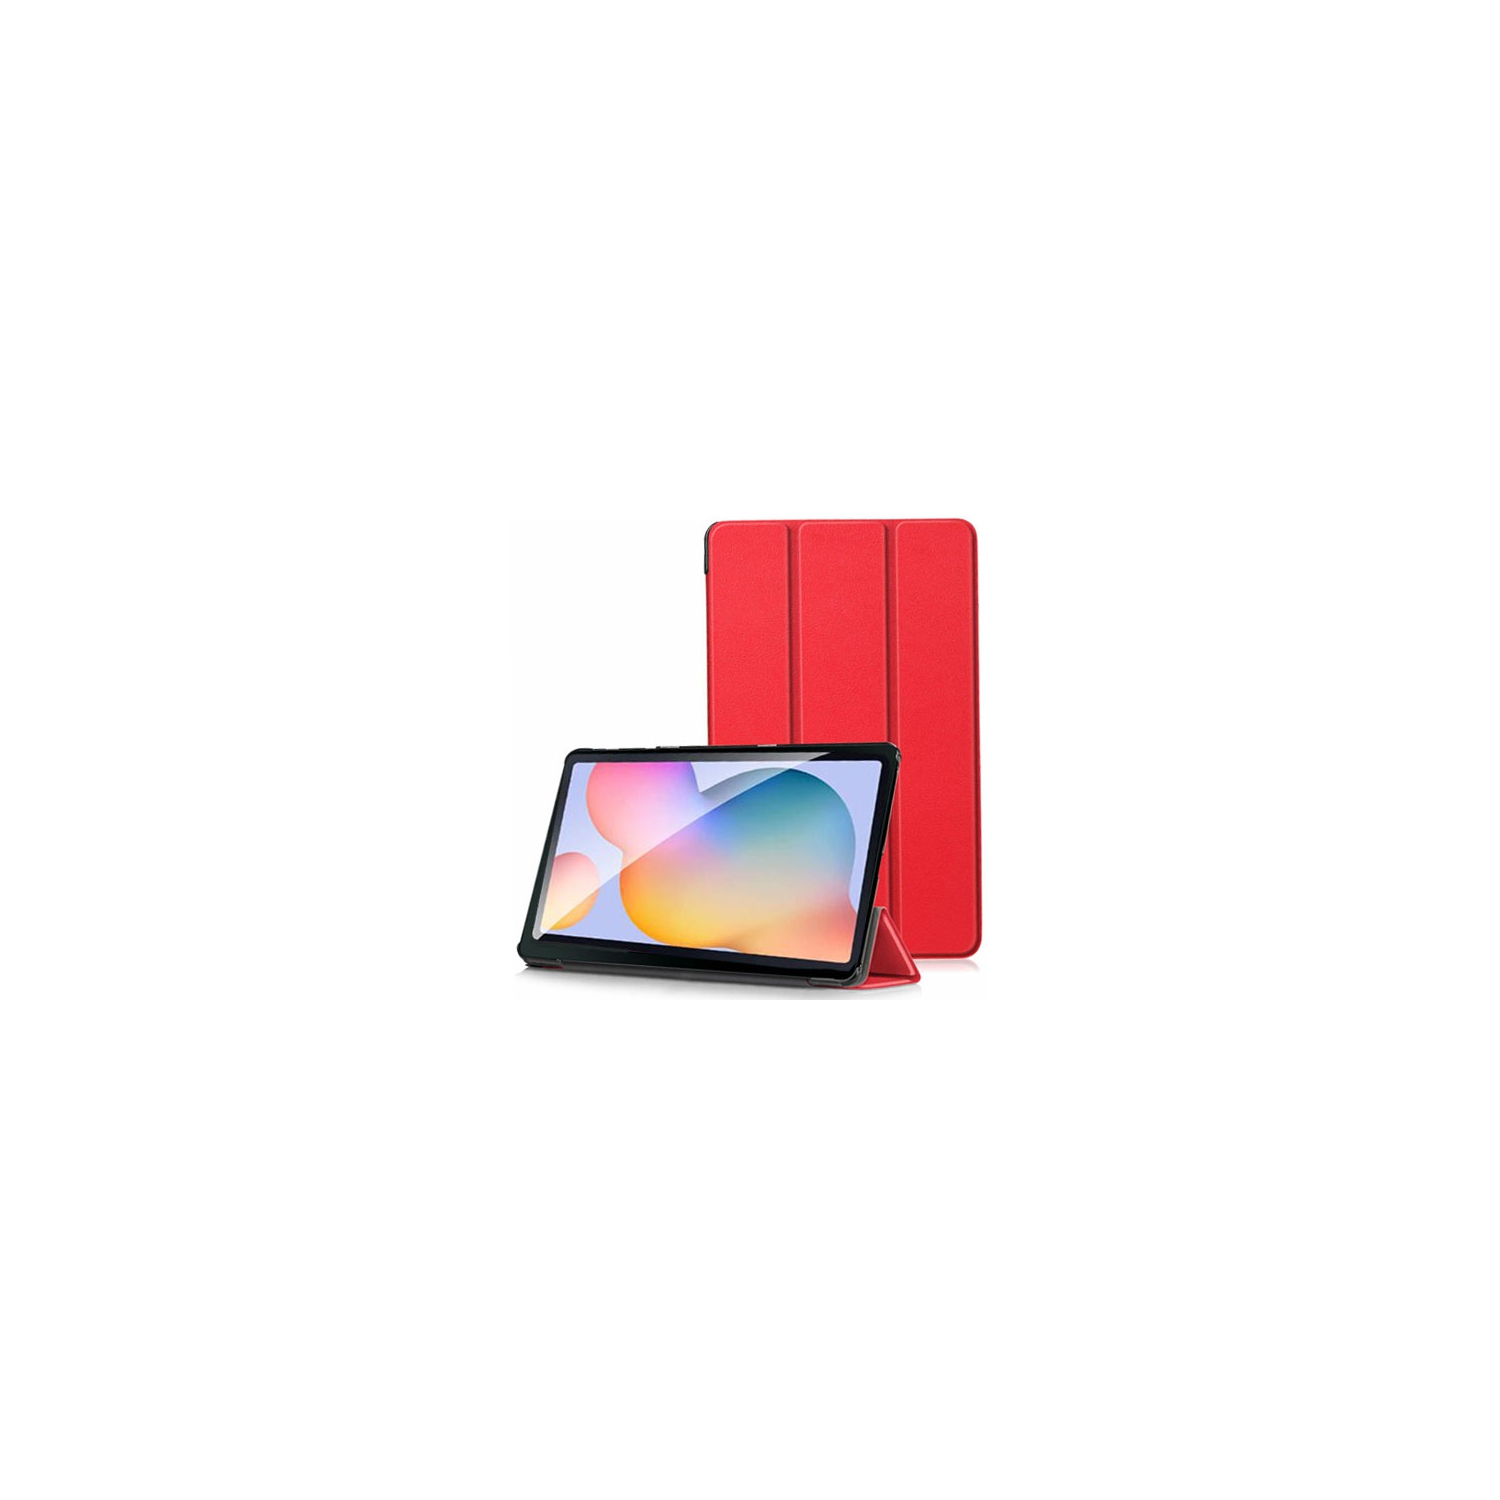 Samsung Galaxy Tab S6 Lite Case 10.4 P610/P615 Red Folio Smart Leather Magnetic Stand Case Back Cover